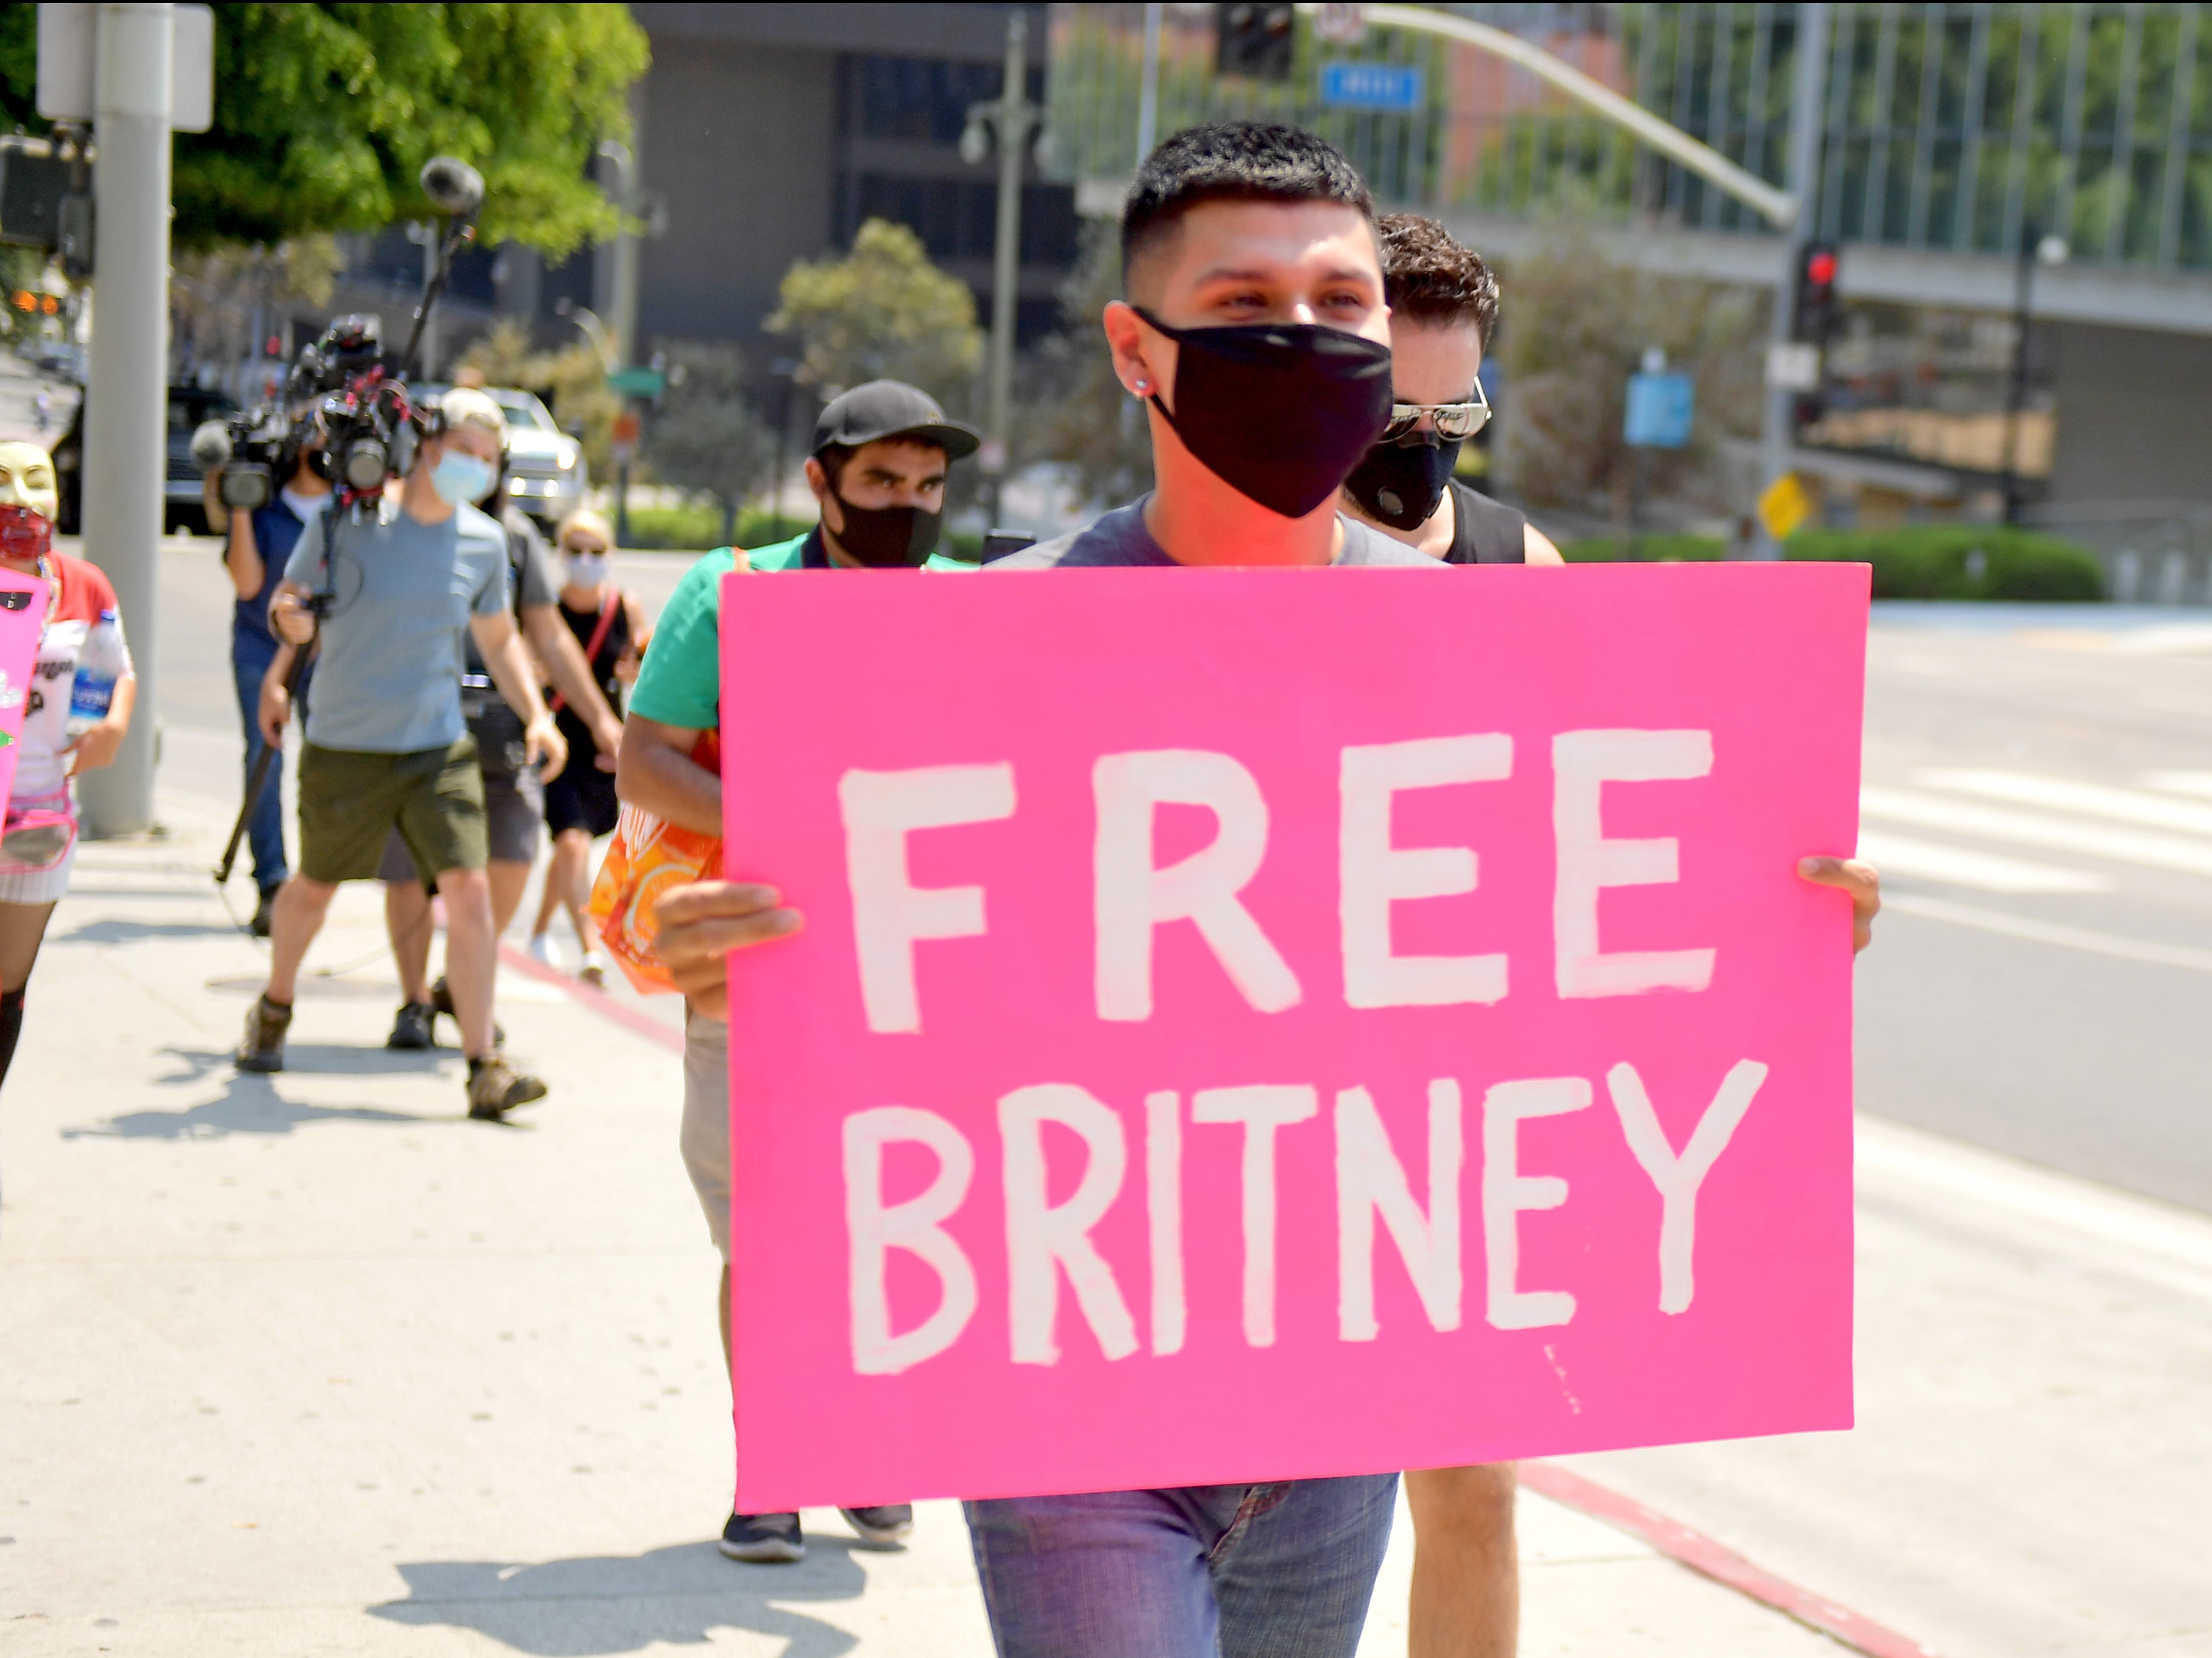 Britney Spears treatment by the paparazzi has come under new focus following the ‘Framing Britney Spears’ documentary